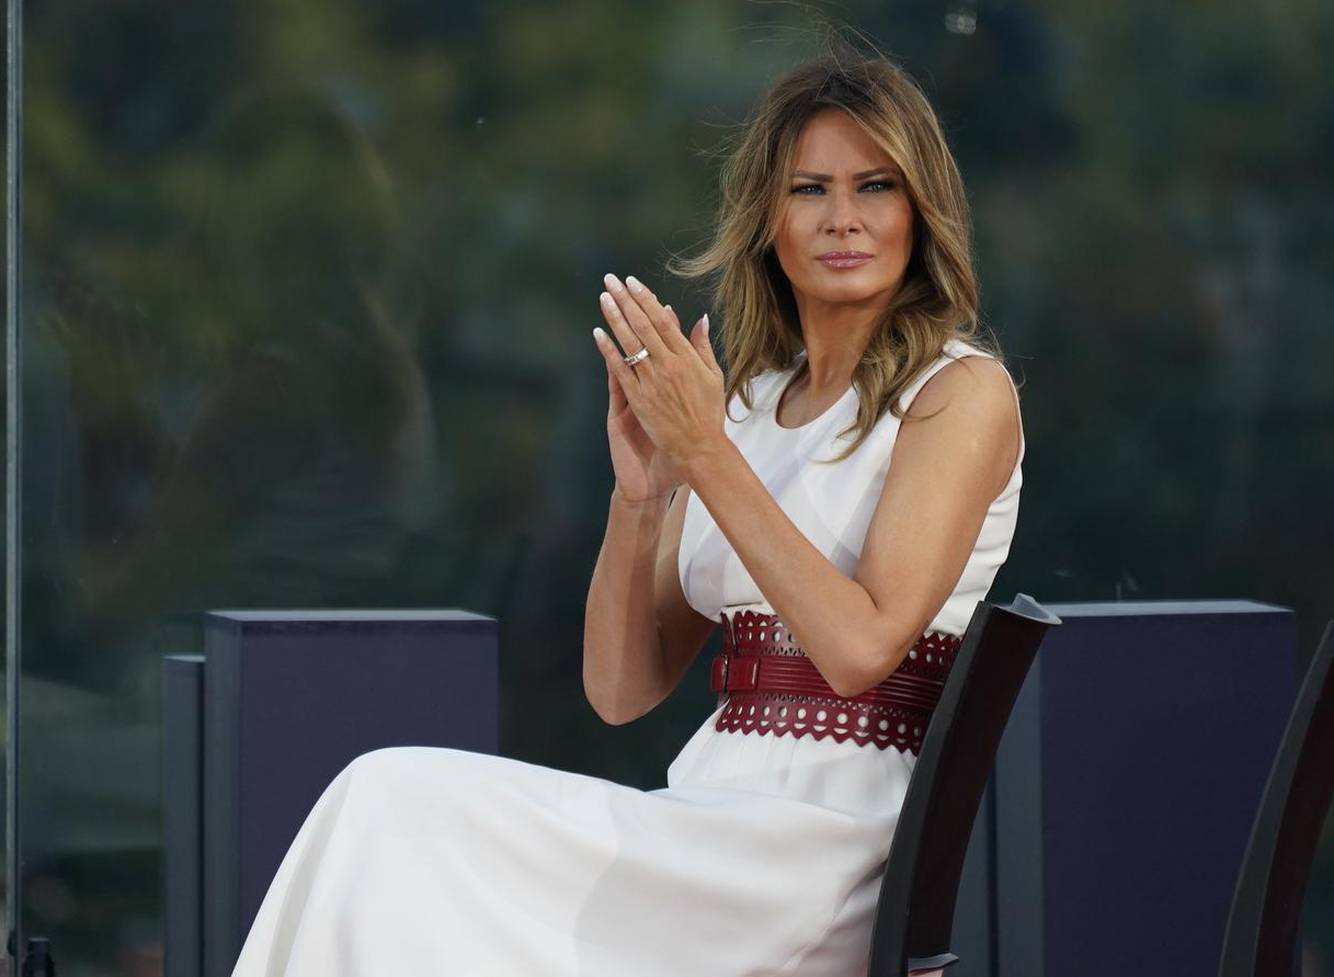 President Donald Trump and First lady Melania Trump participate in the 2020 Salute to America